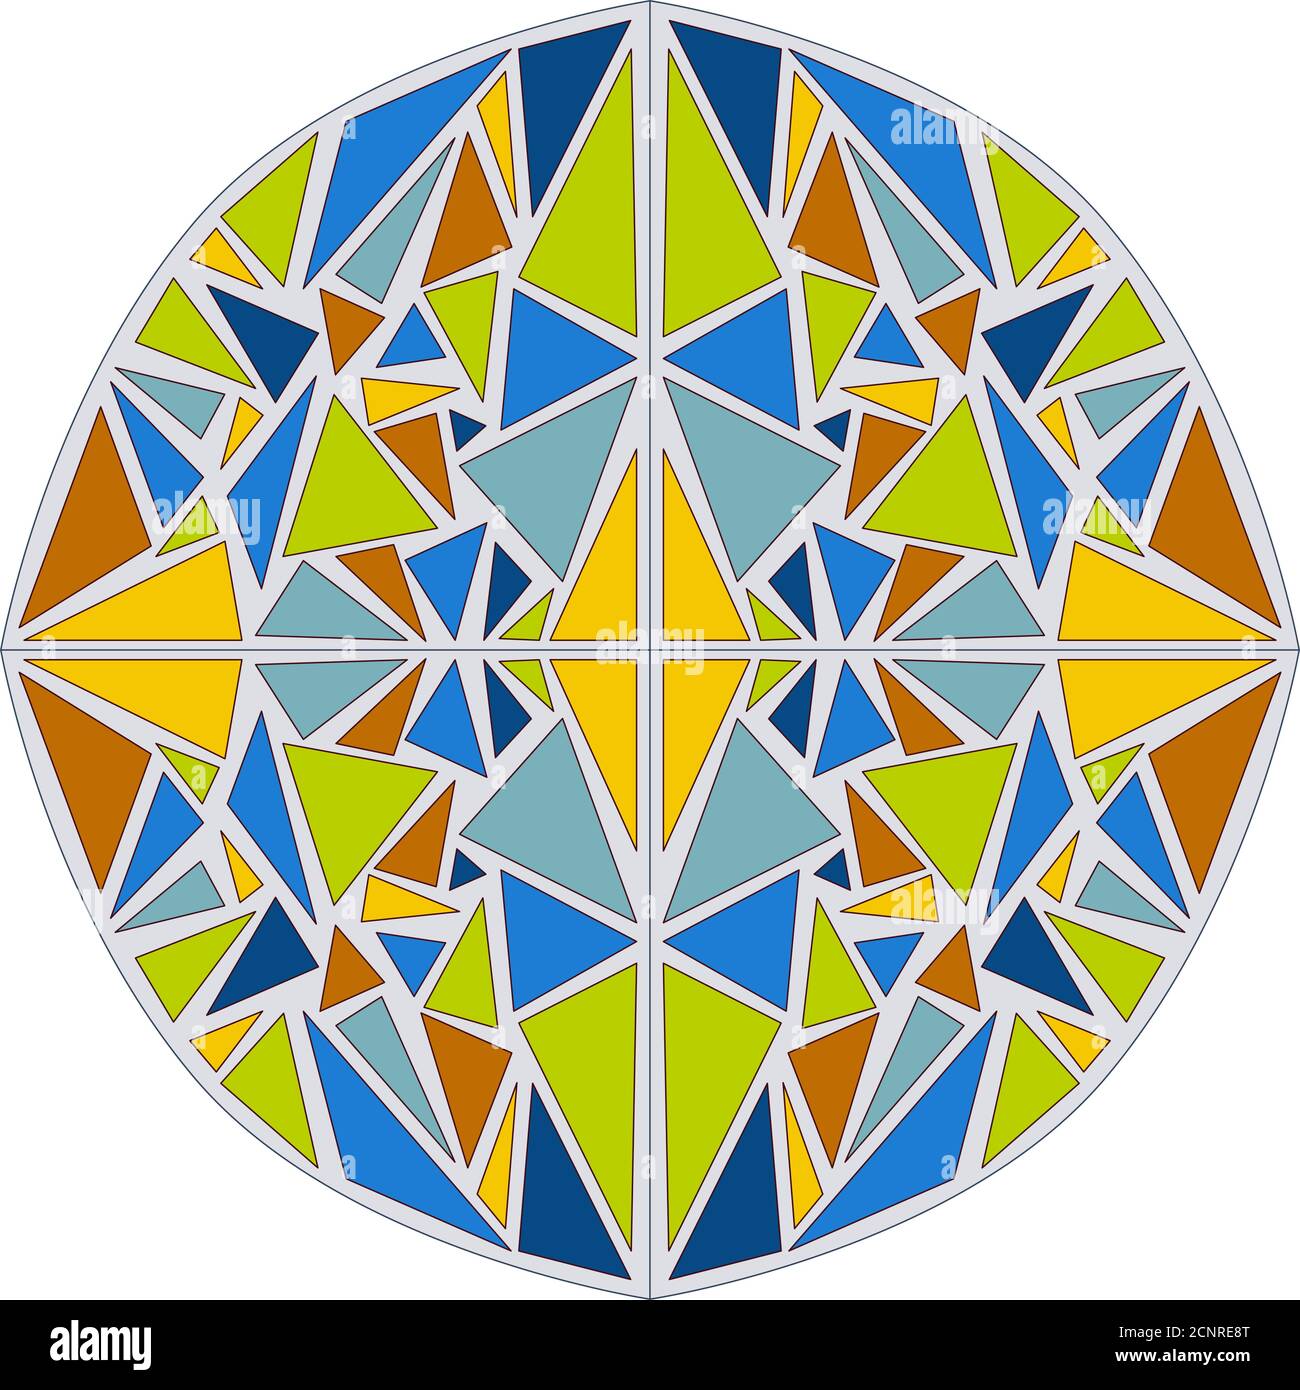 Mosaic circle vector illustration. Colorful isolated pattern. Print on paper, fabric, ceramic. Stock Vector